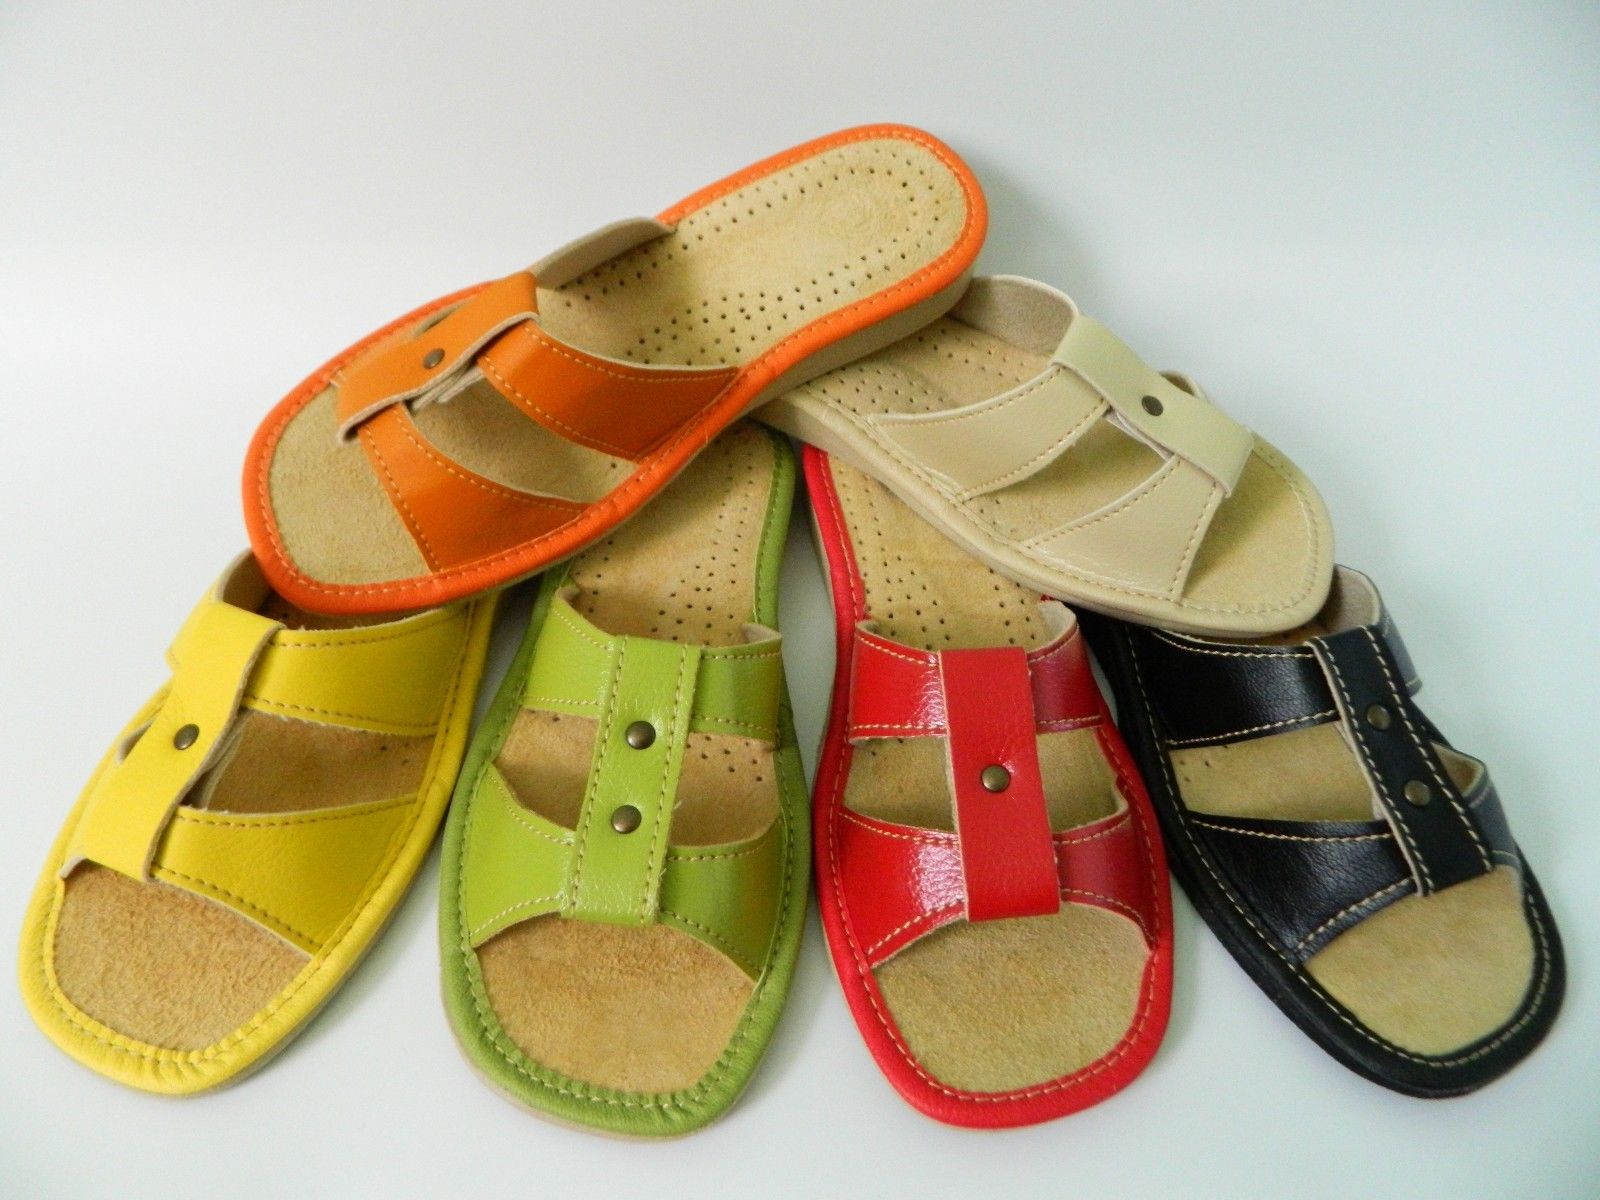 New Womens Natural Leather Slippers - Flip Flops - Sandals UK Size 3 4 5 6 7 8 